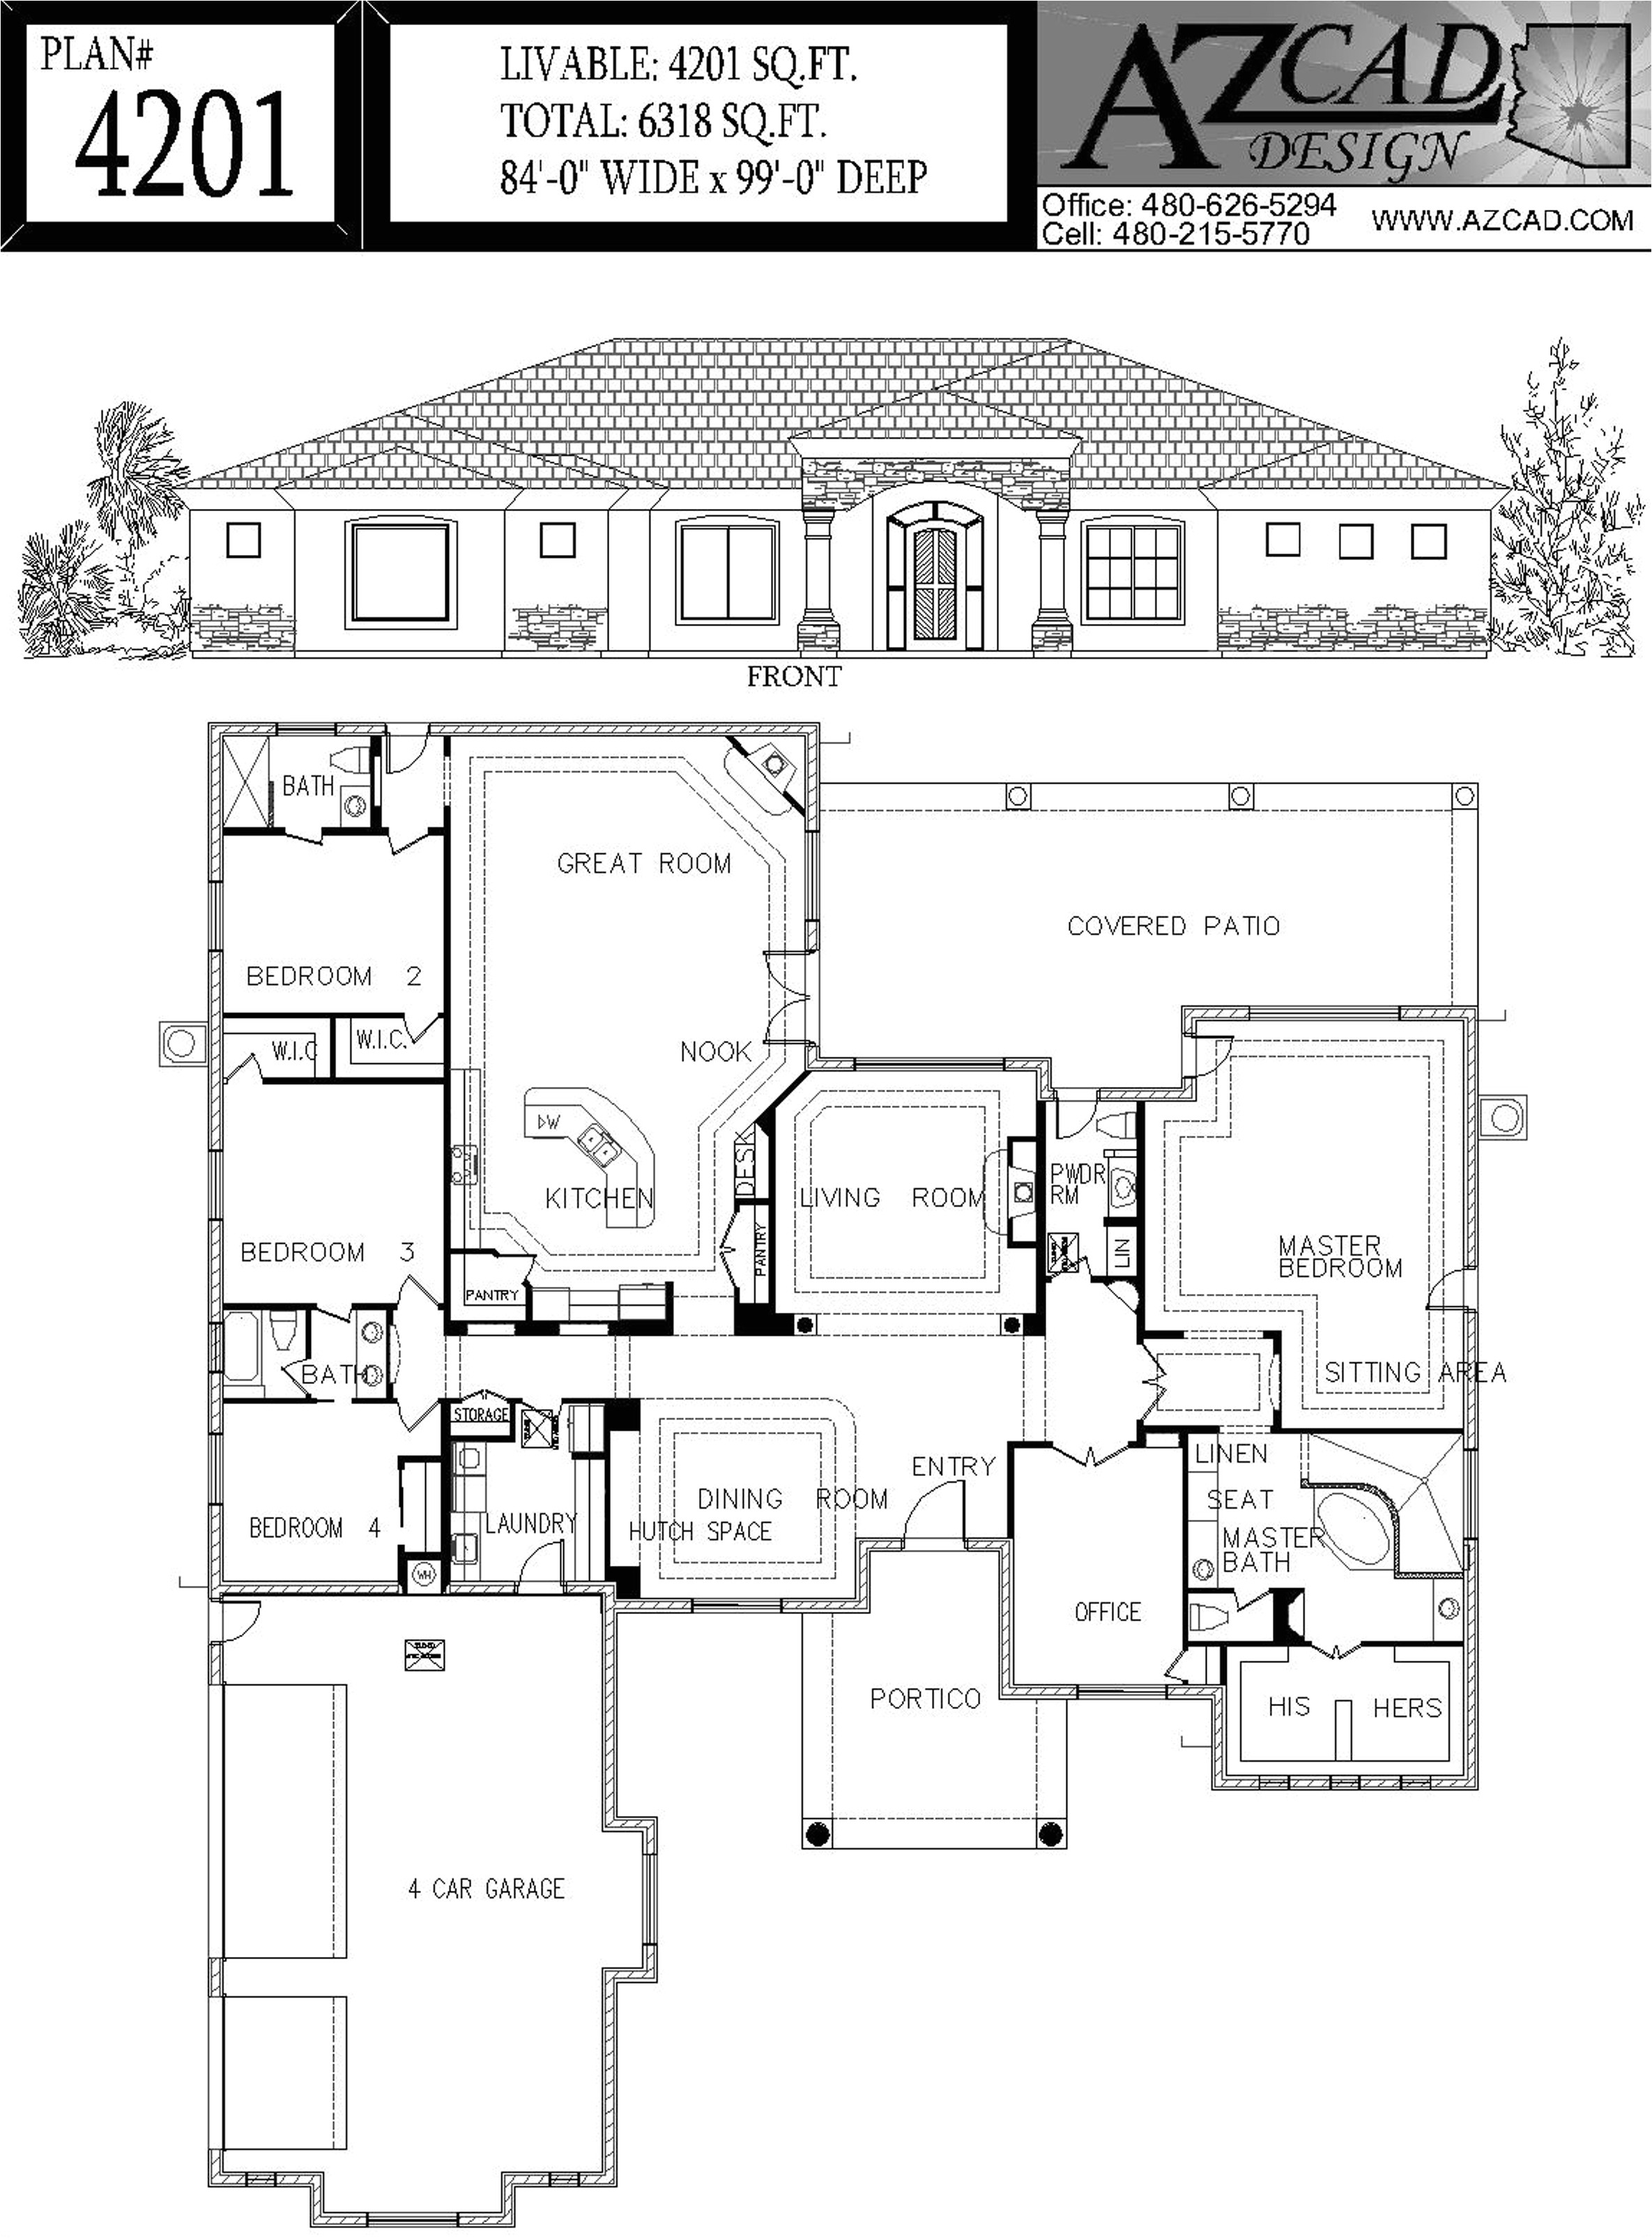 Tucson House Plans House Plans In Tucson Az Home Design and Style